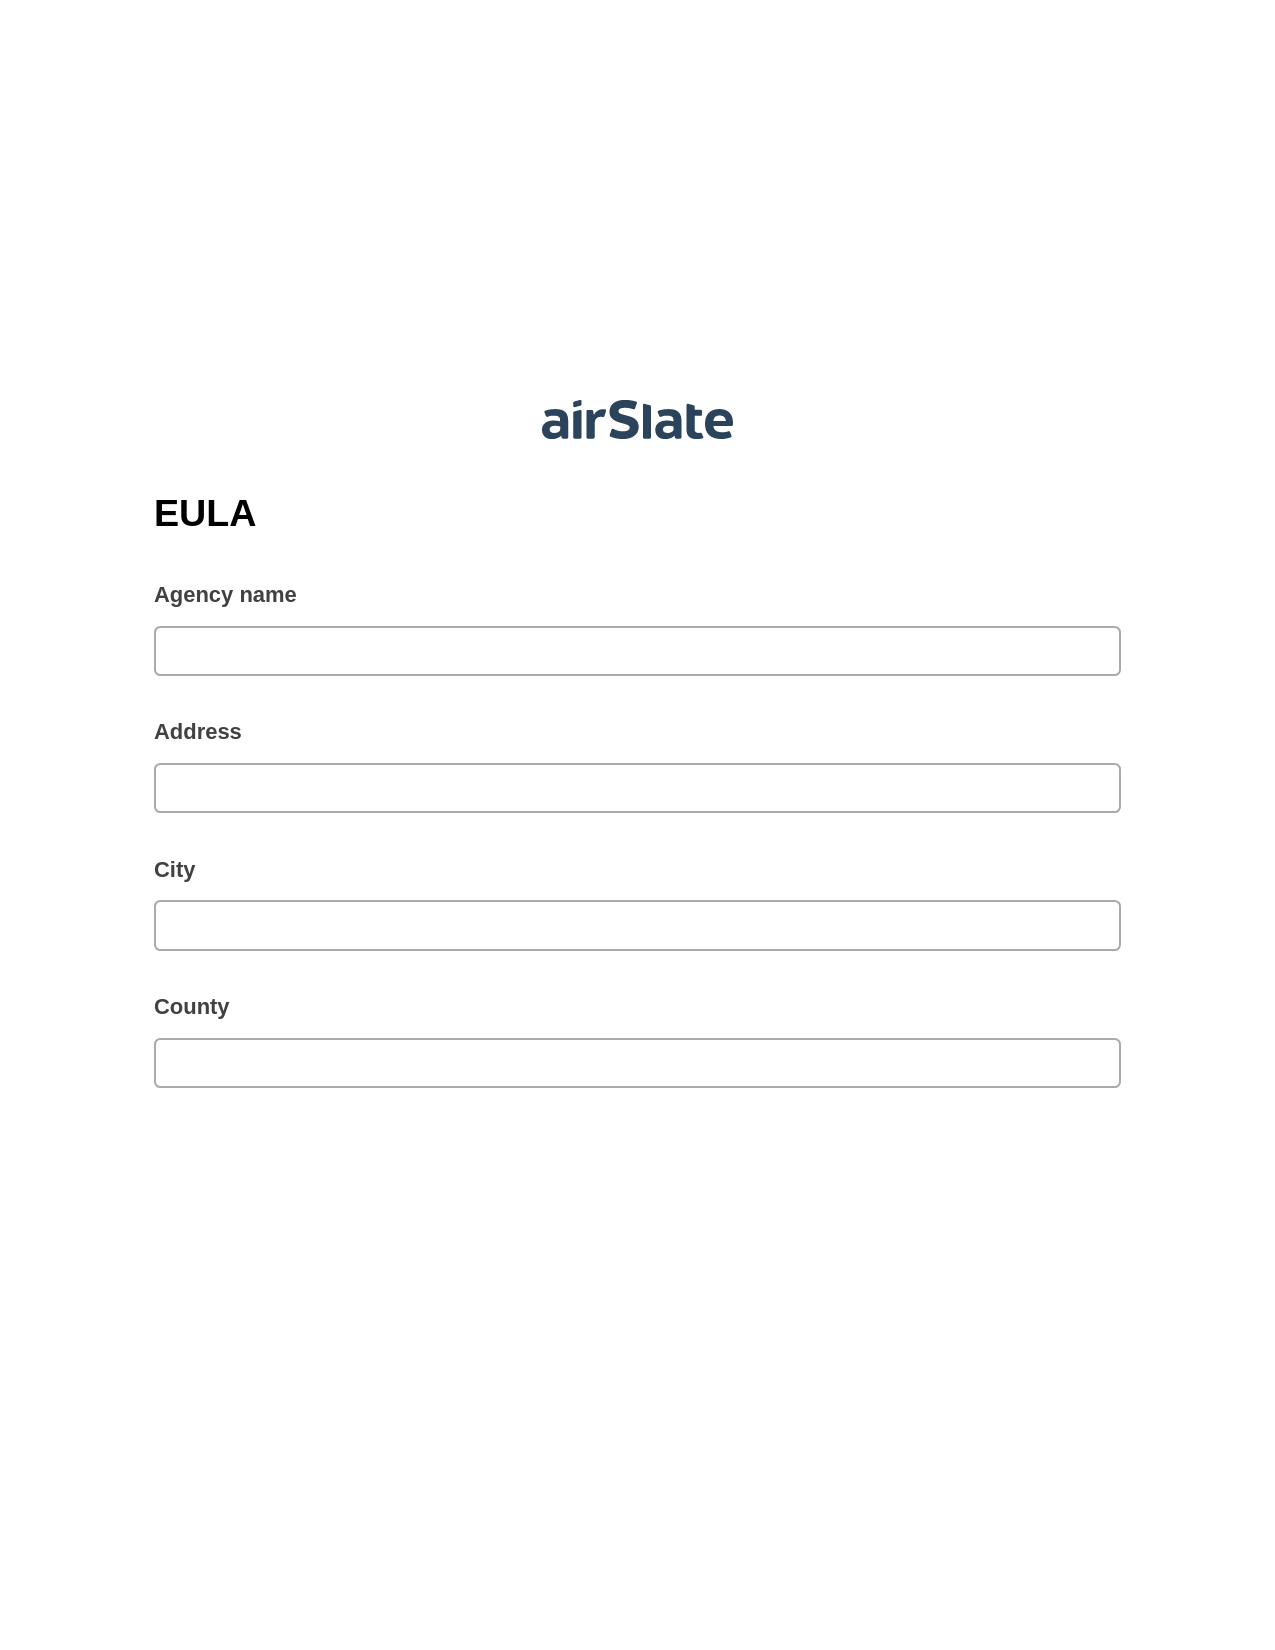 EULA Pre-fill Slate from MS Dynamics 365 Records Bot, Set signature type addon, Export to Excel 365 Bot